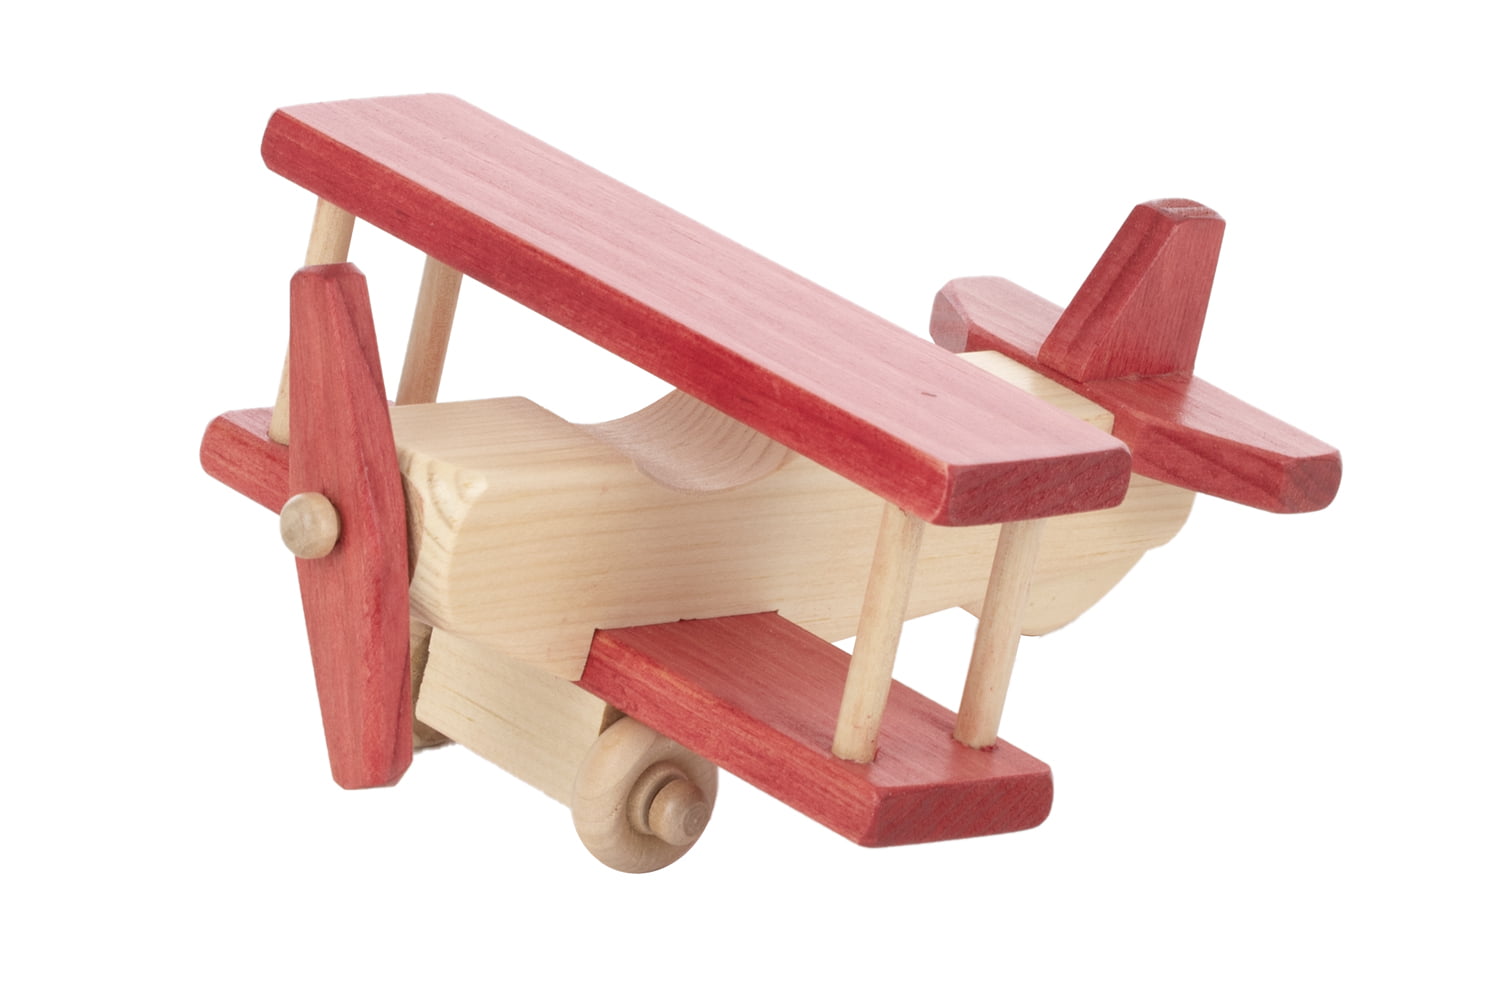 Child's Small Wooden Maple Airplane - Red / Maple